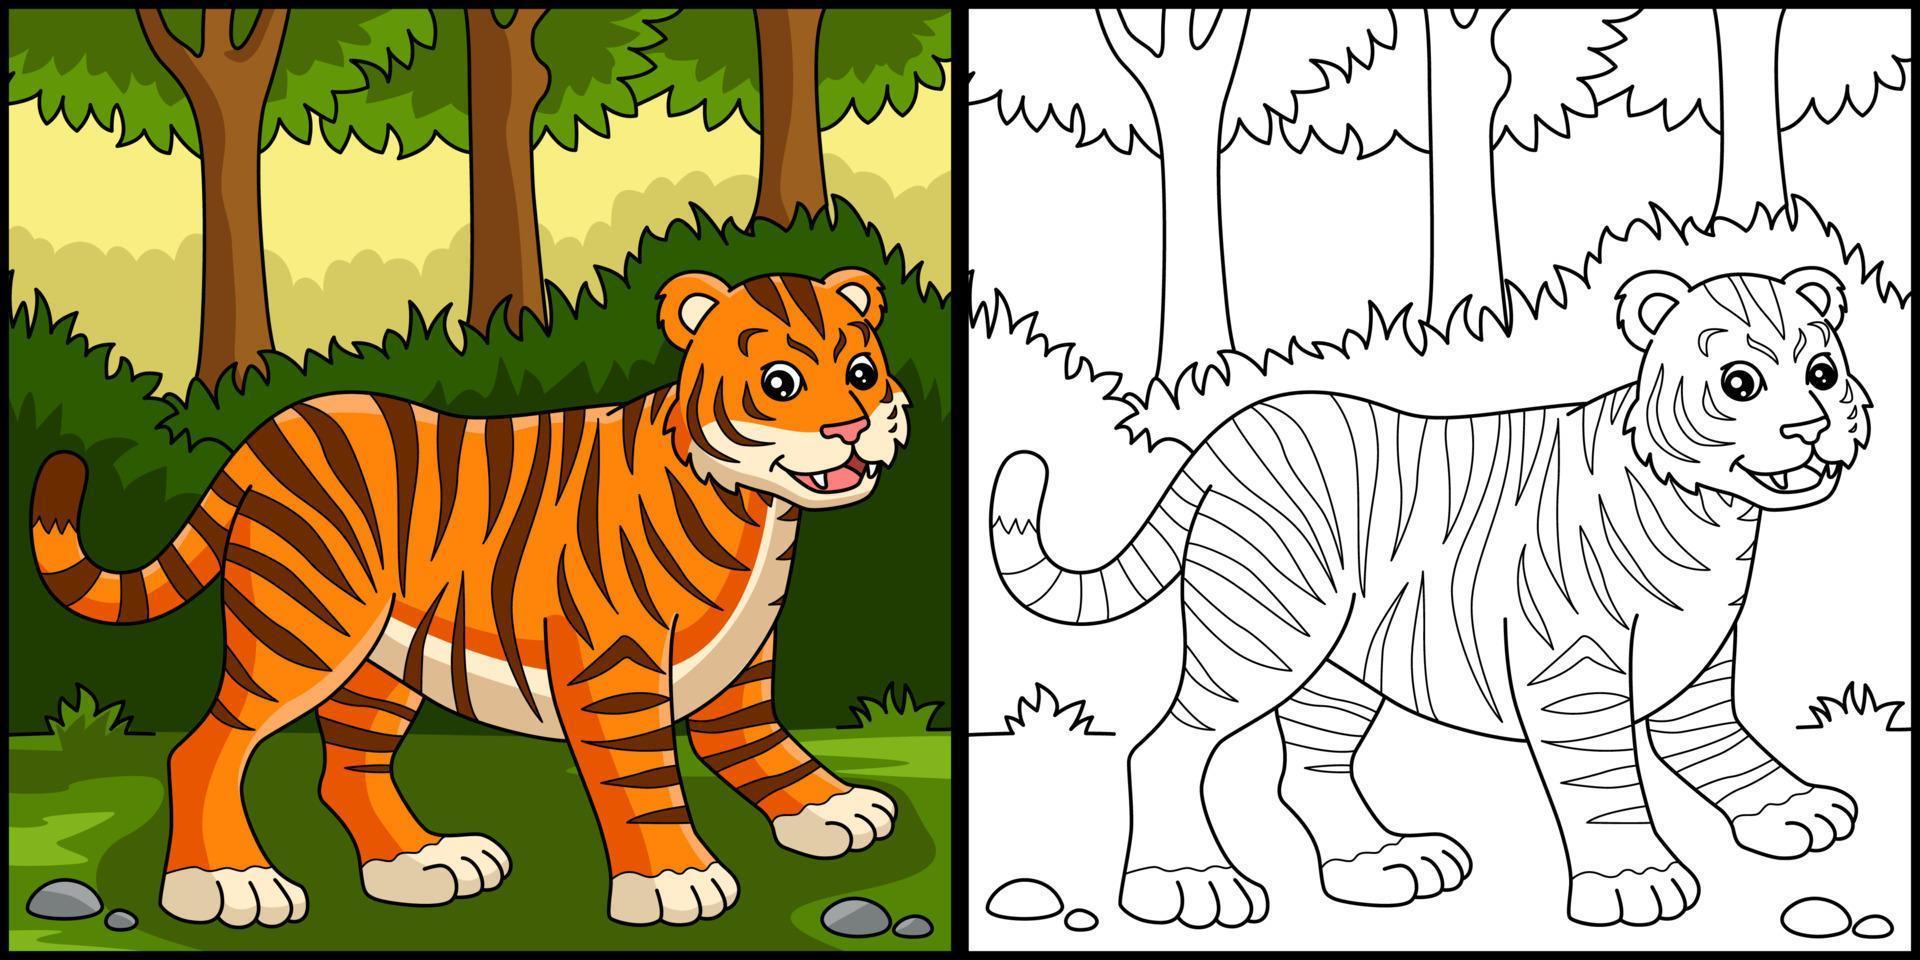 Tiger Coloring Page Colored Illustration vector